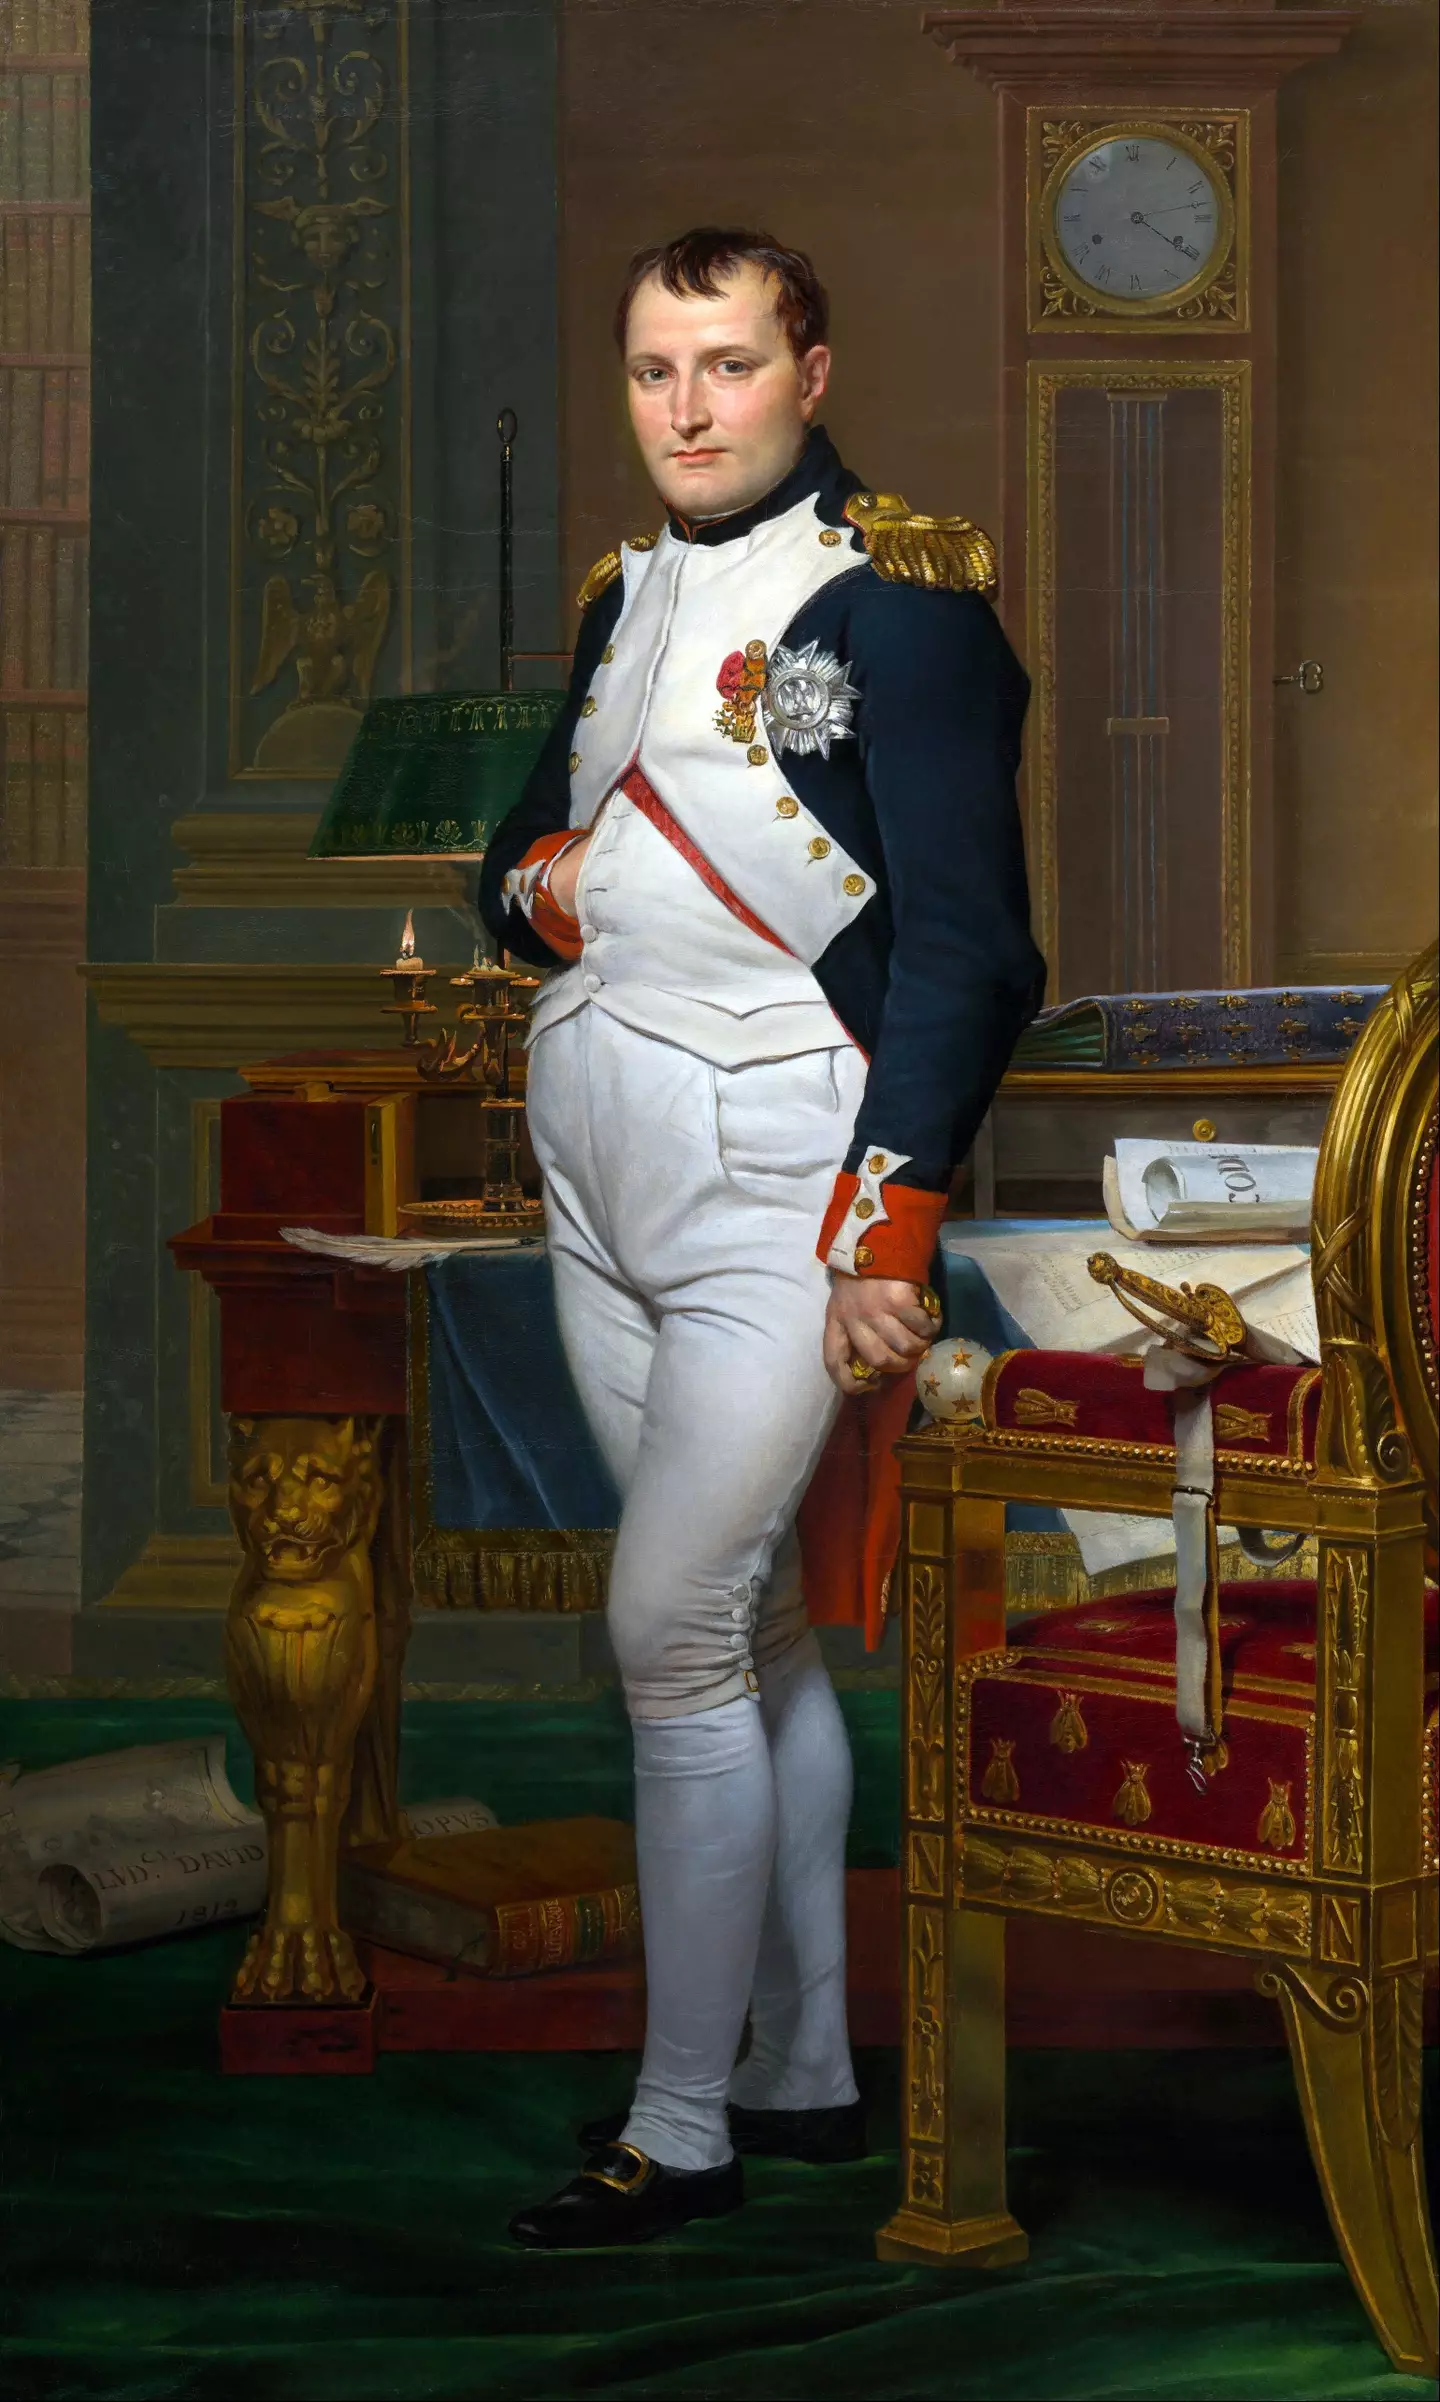 Napoleon Bonaparte could have been seriously overcompensating with his personality.